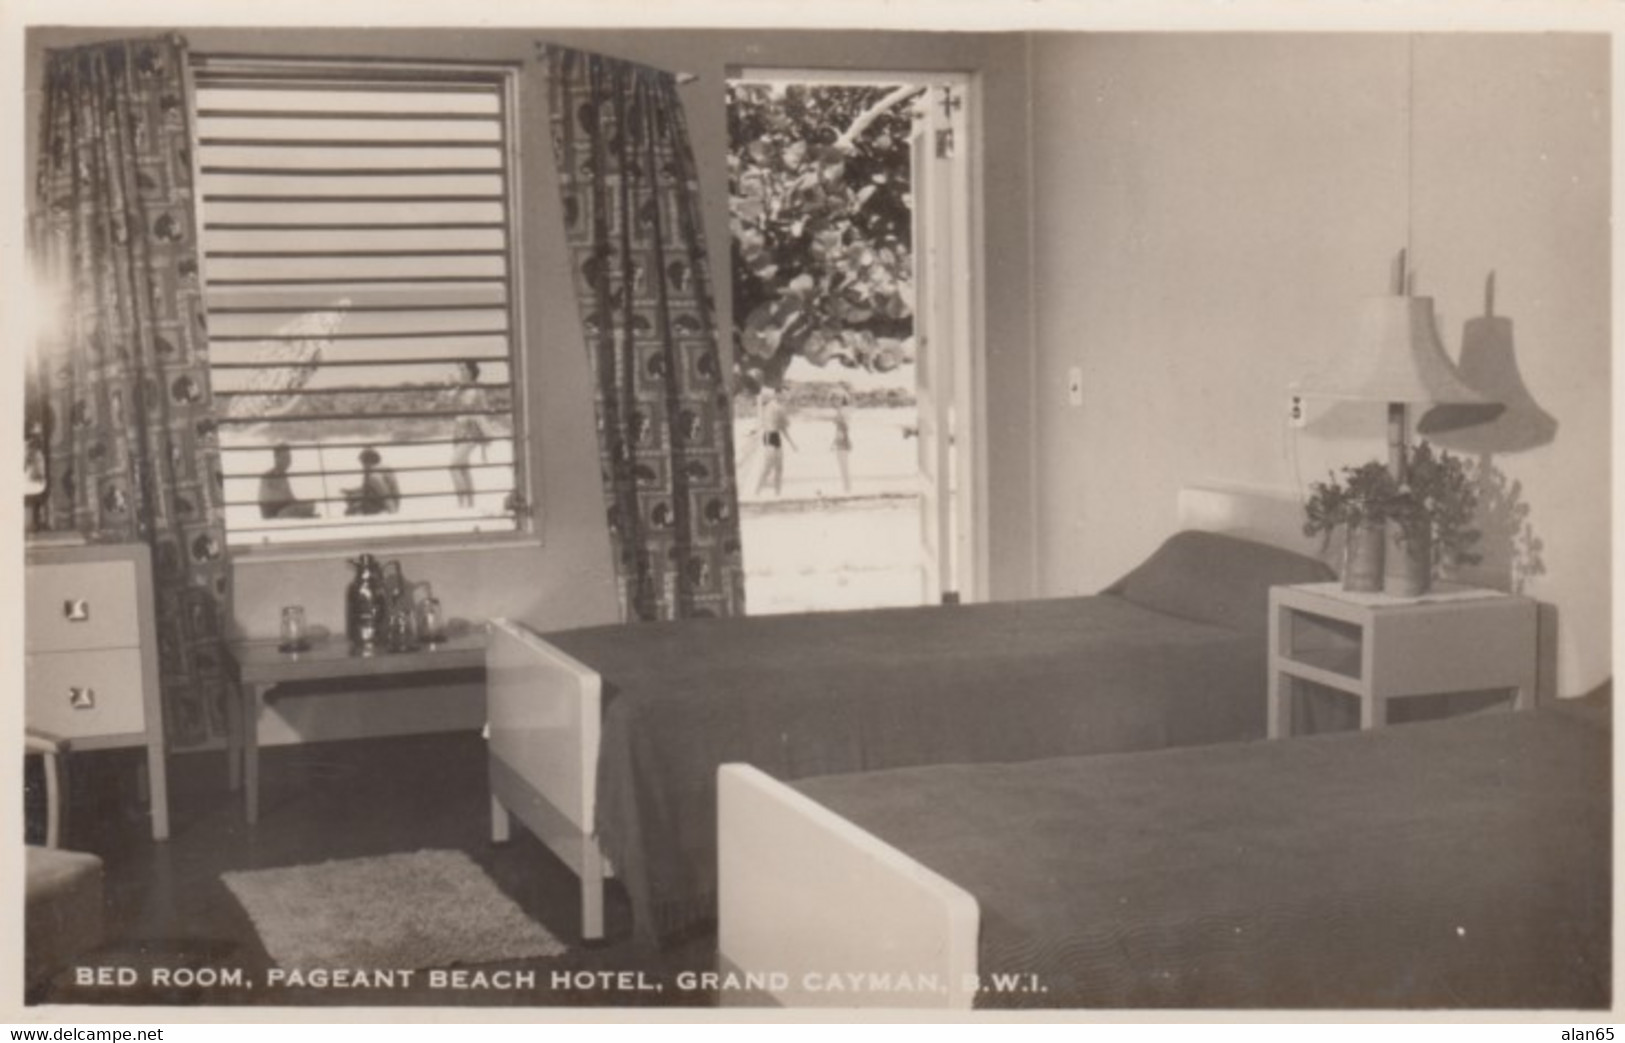 Grand Cayman BWI, Pageant Beach Hotel Bedroom Interior View, C1940s/50s Vintage Real Photo Postcard - Kaimaninseln